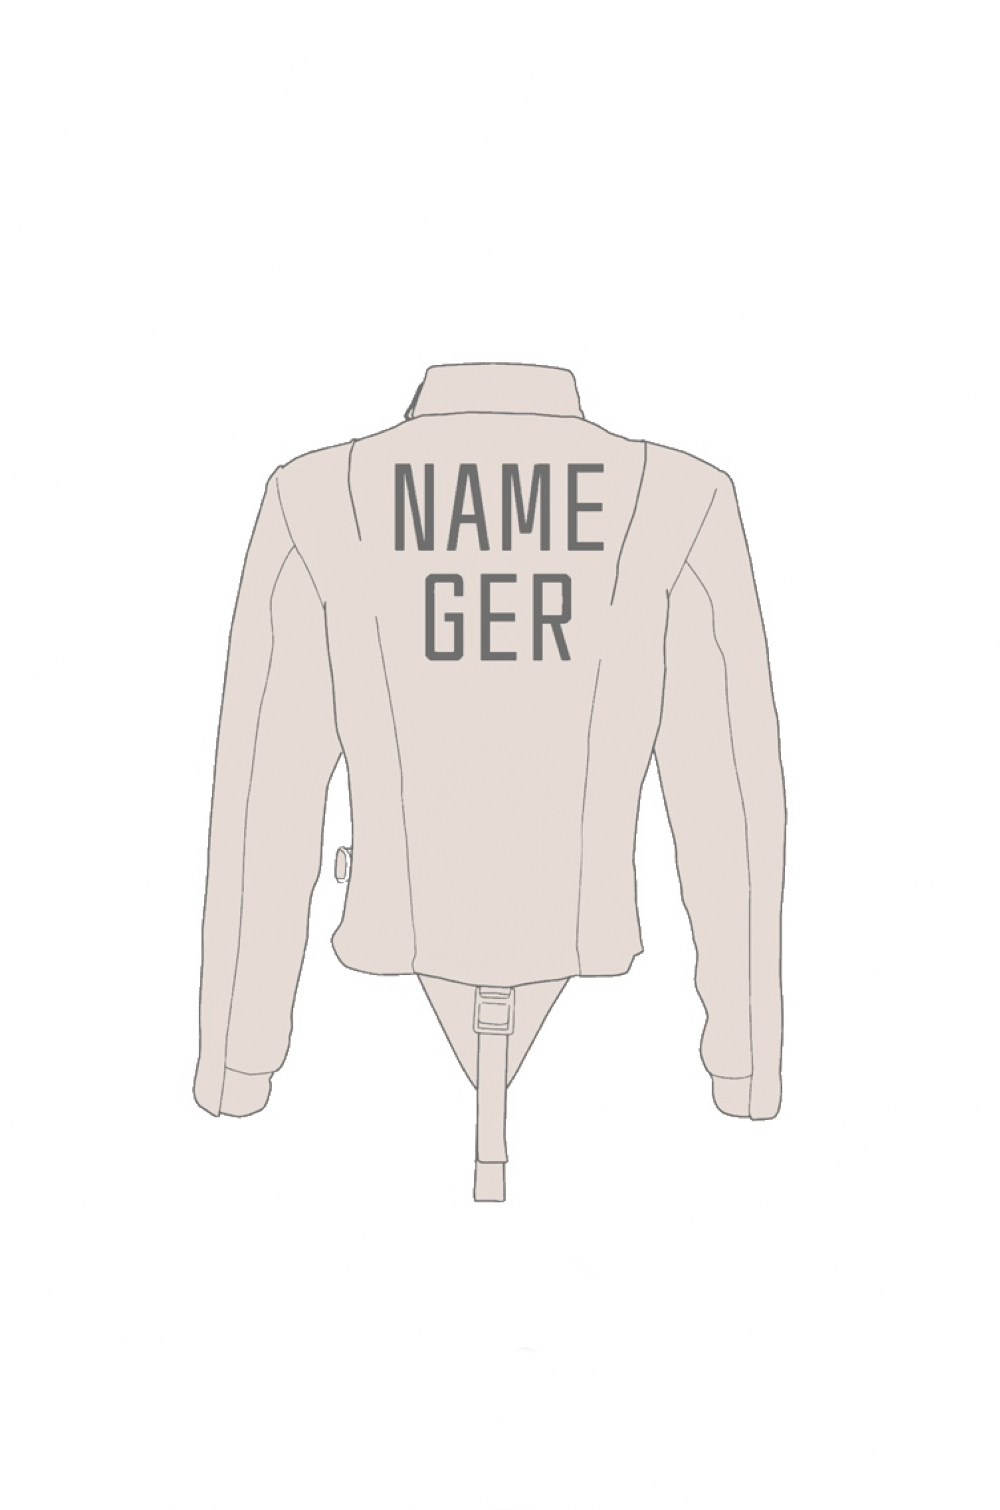 Name Printing on Fencing Jackets (foil print)